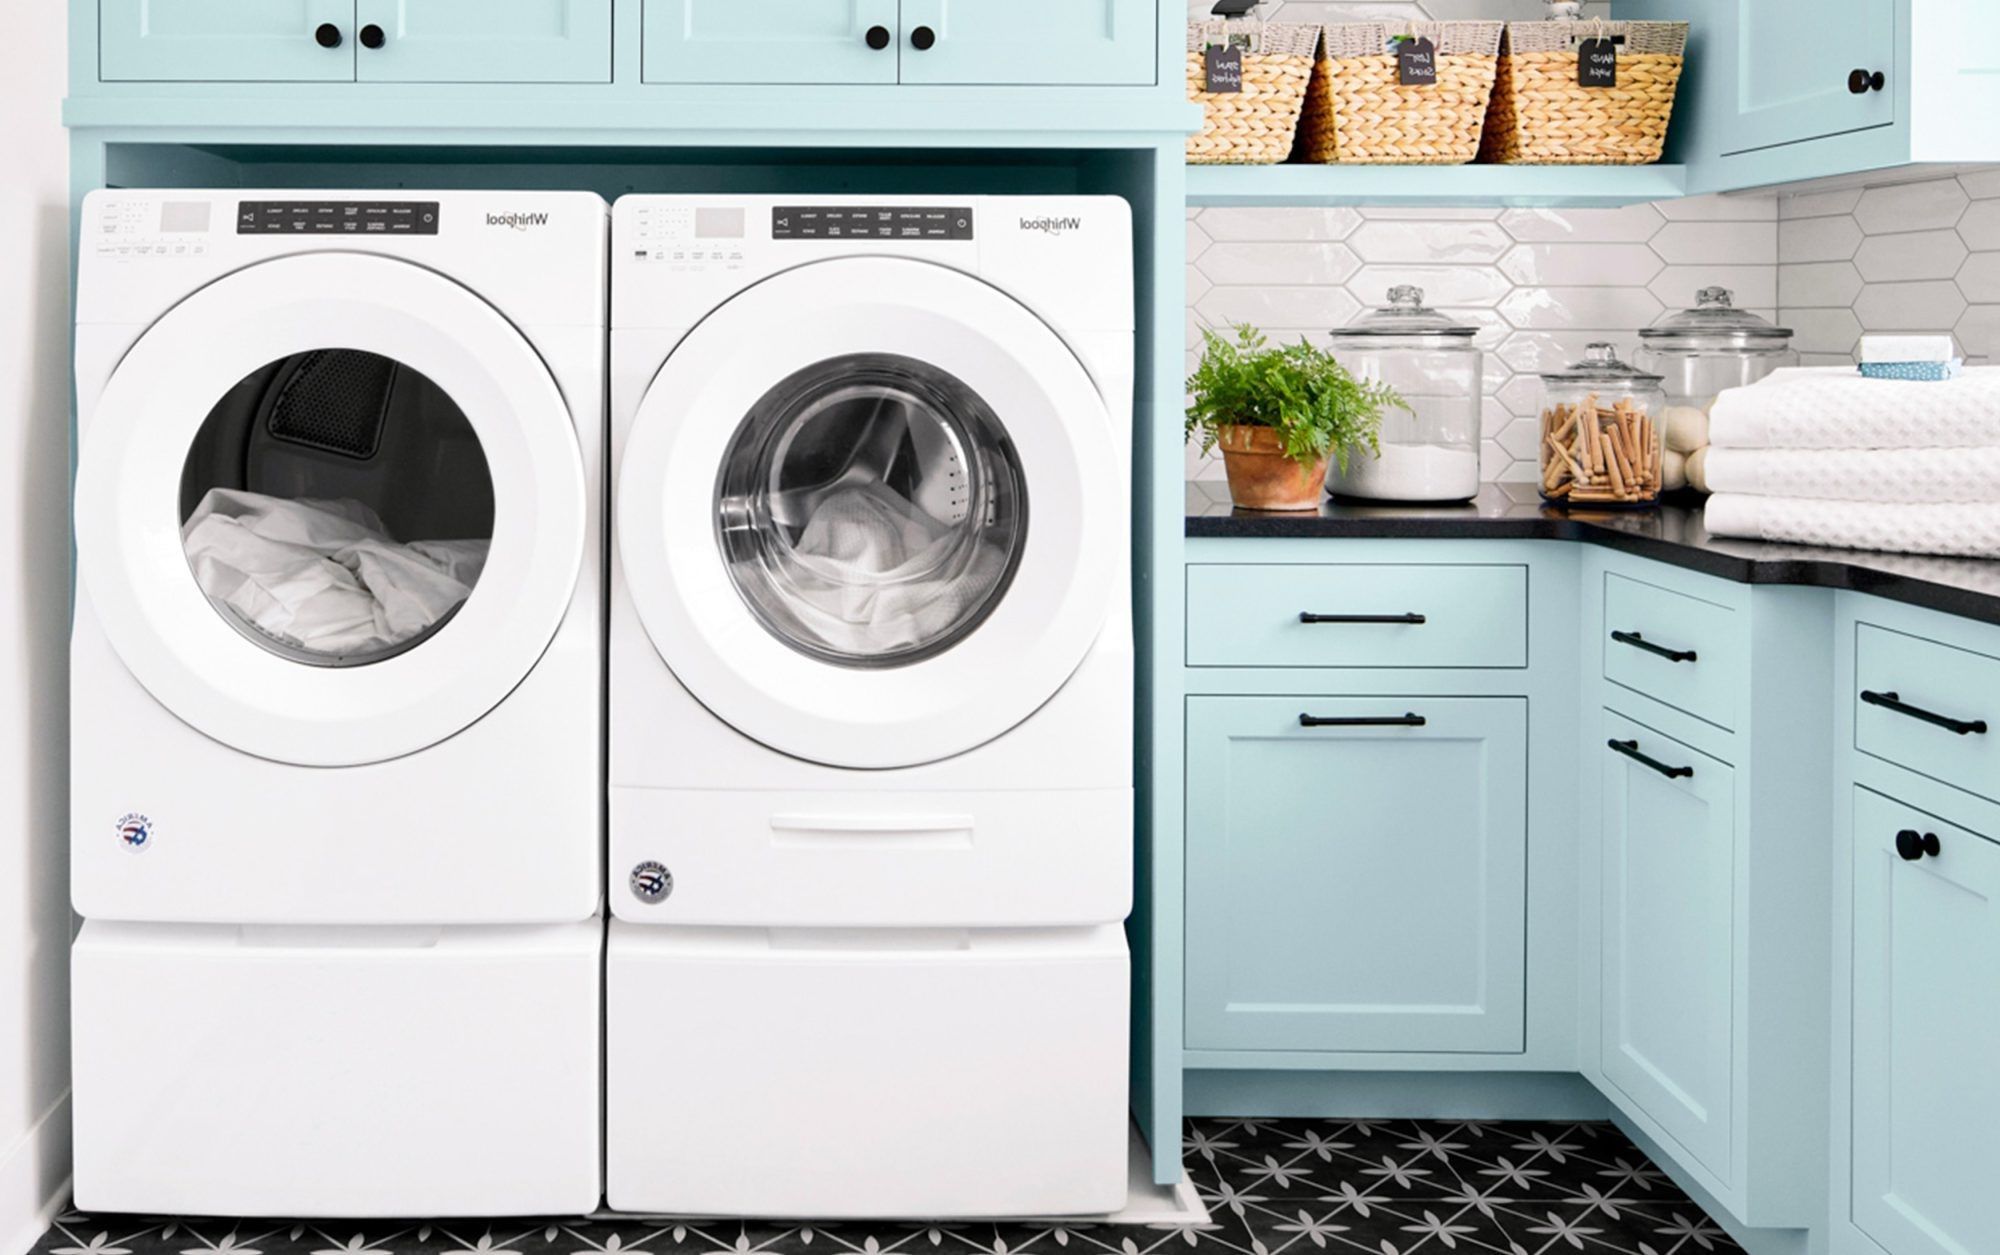 How To Bleach White Towels In A Washing Machine